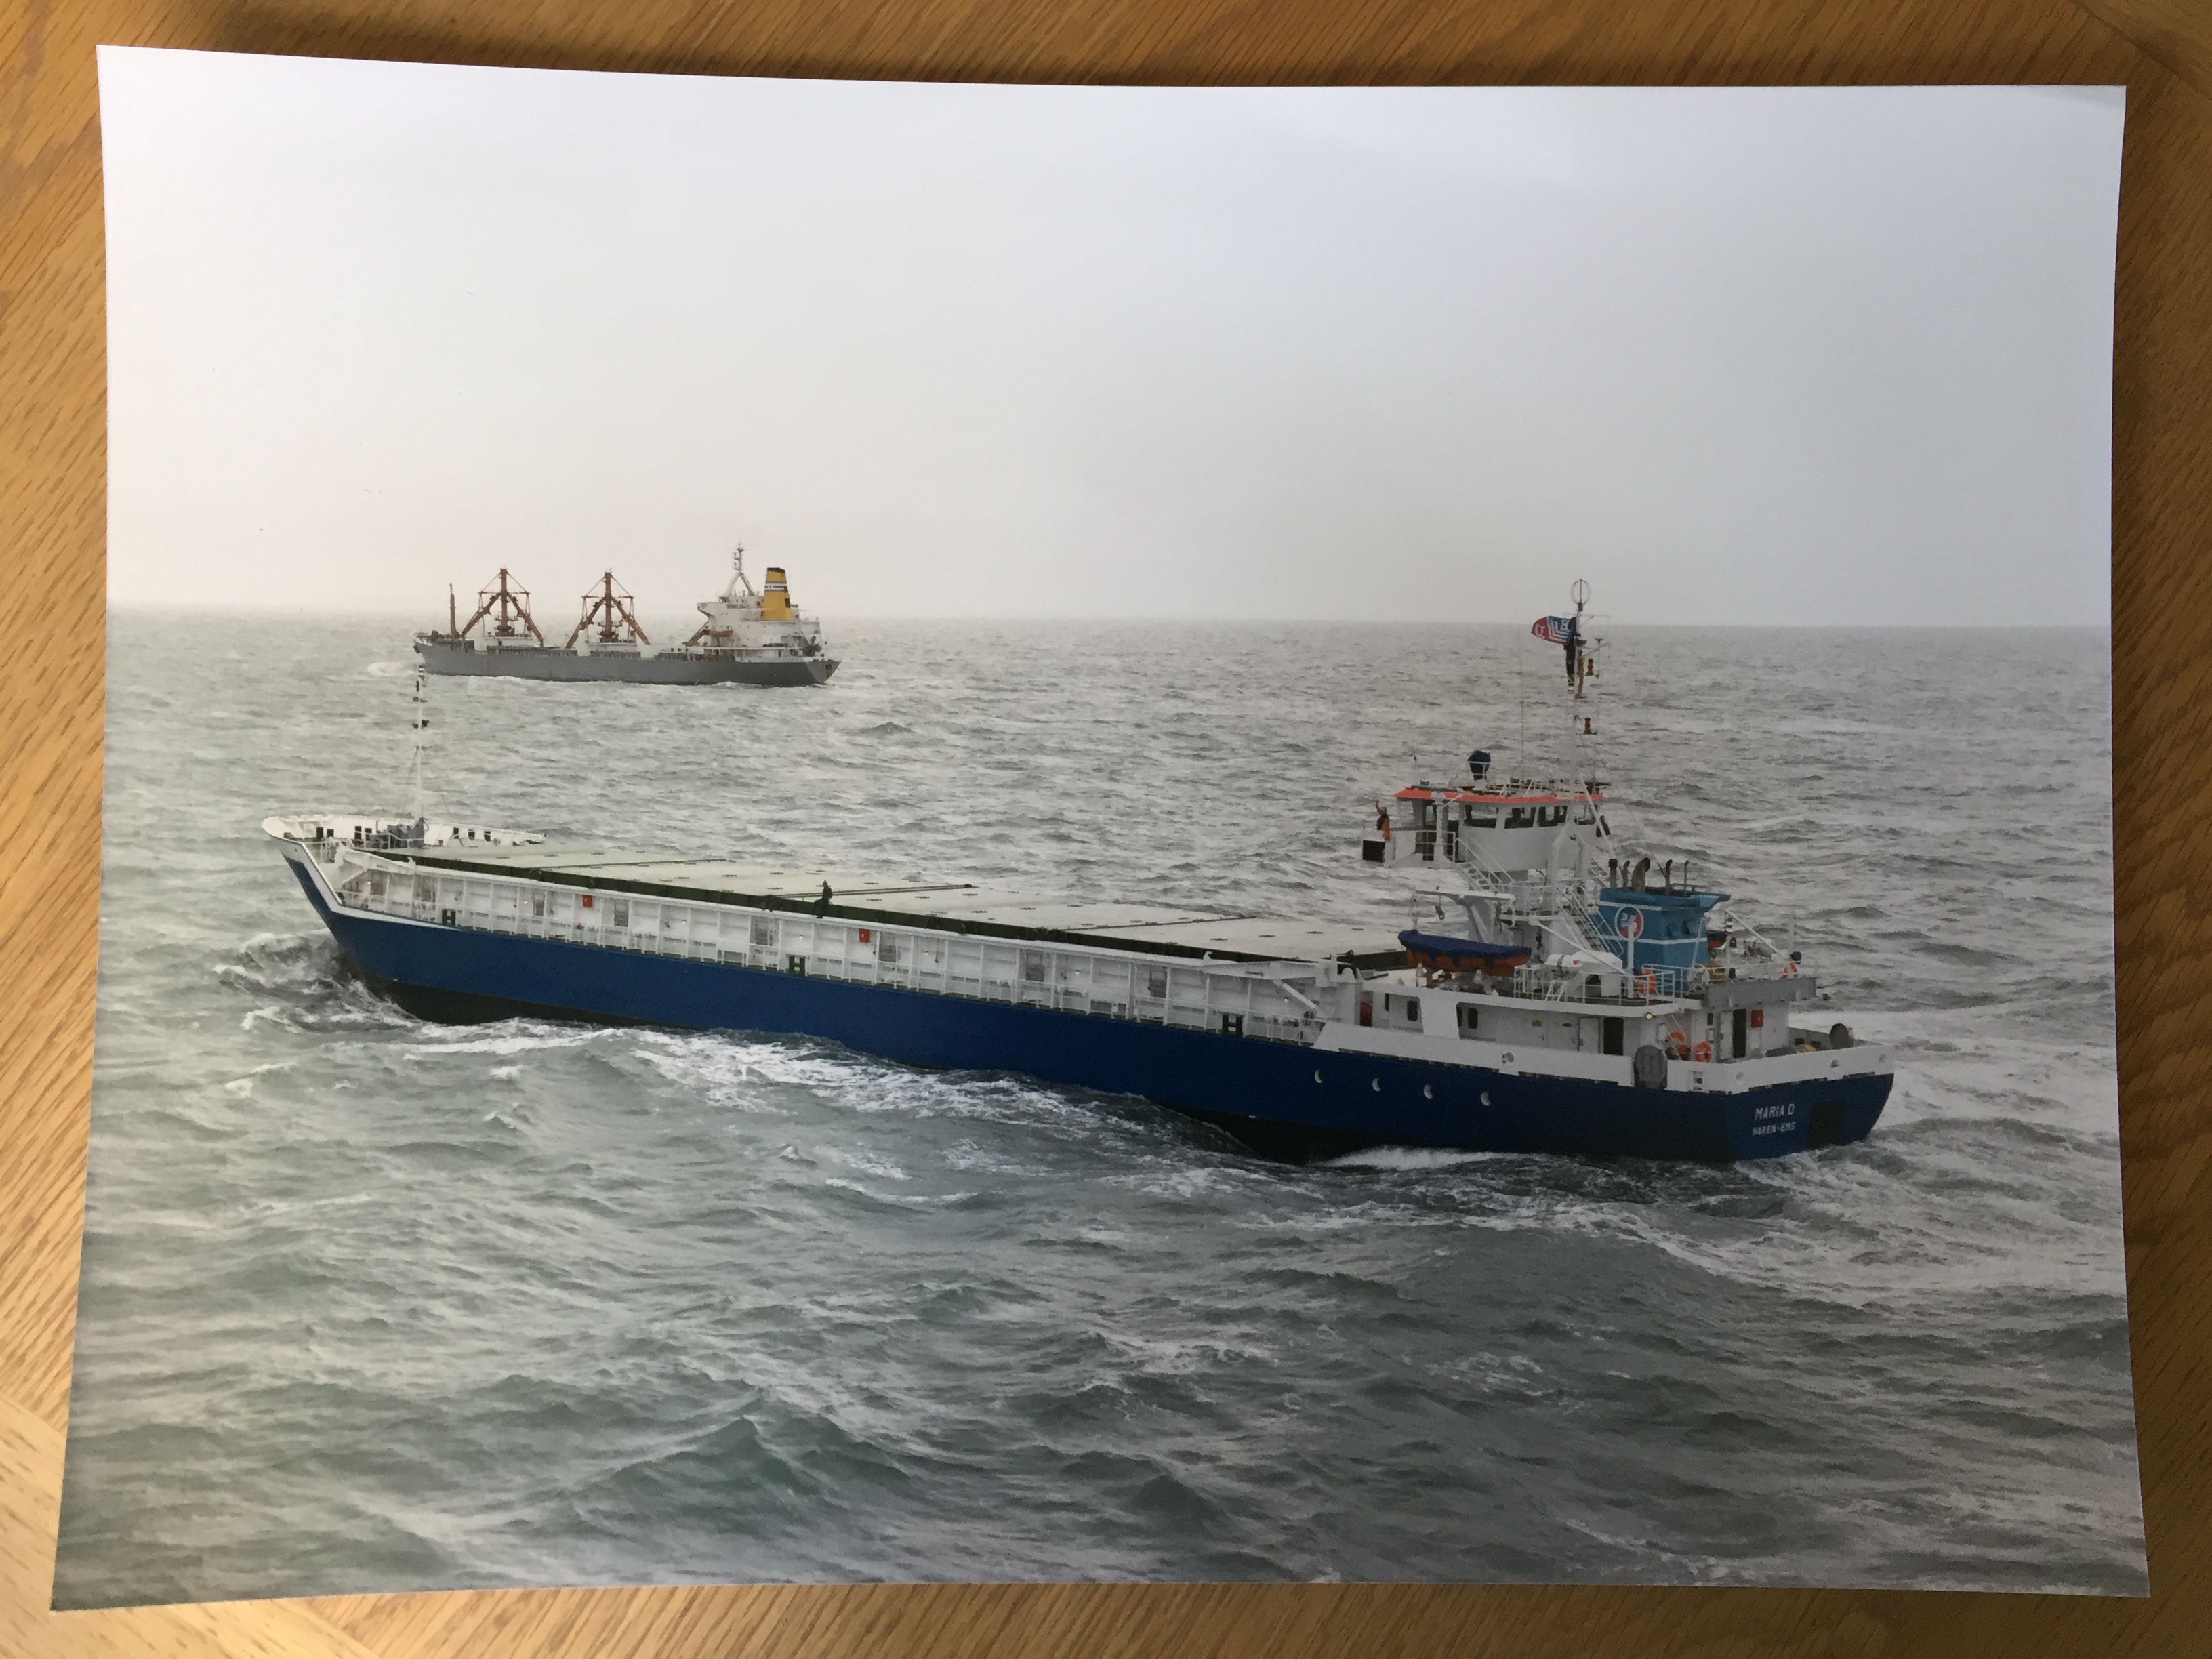 LARGE SIZE COLOUR PHOTOGRAPH OF THE CONTAINER VESSEL MARIA O